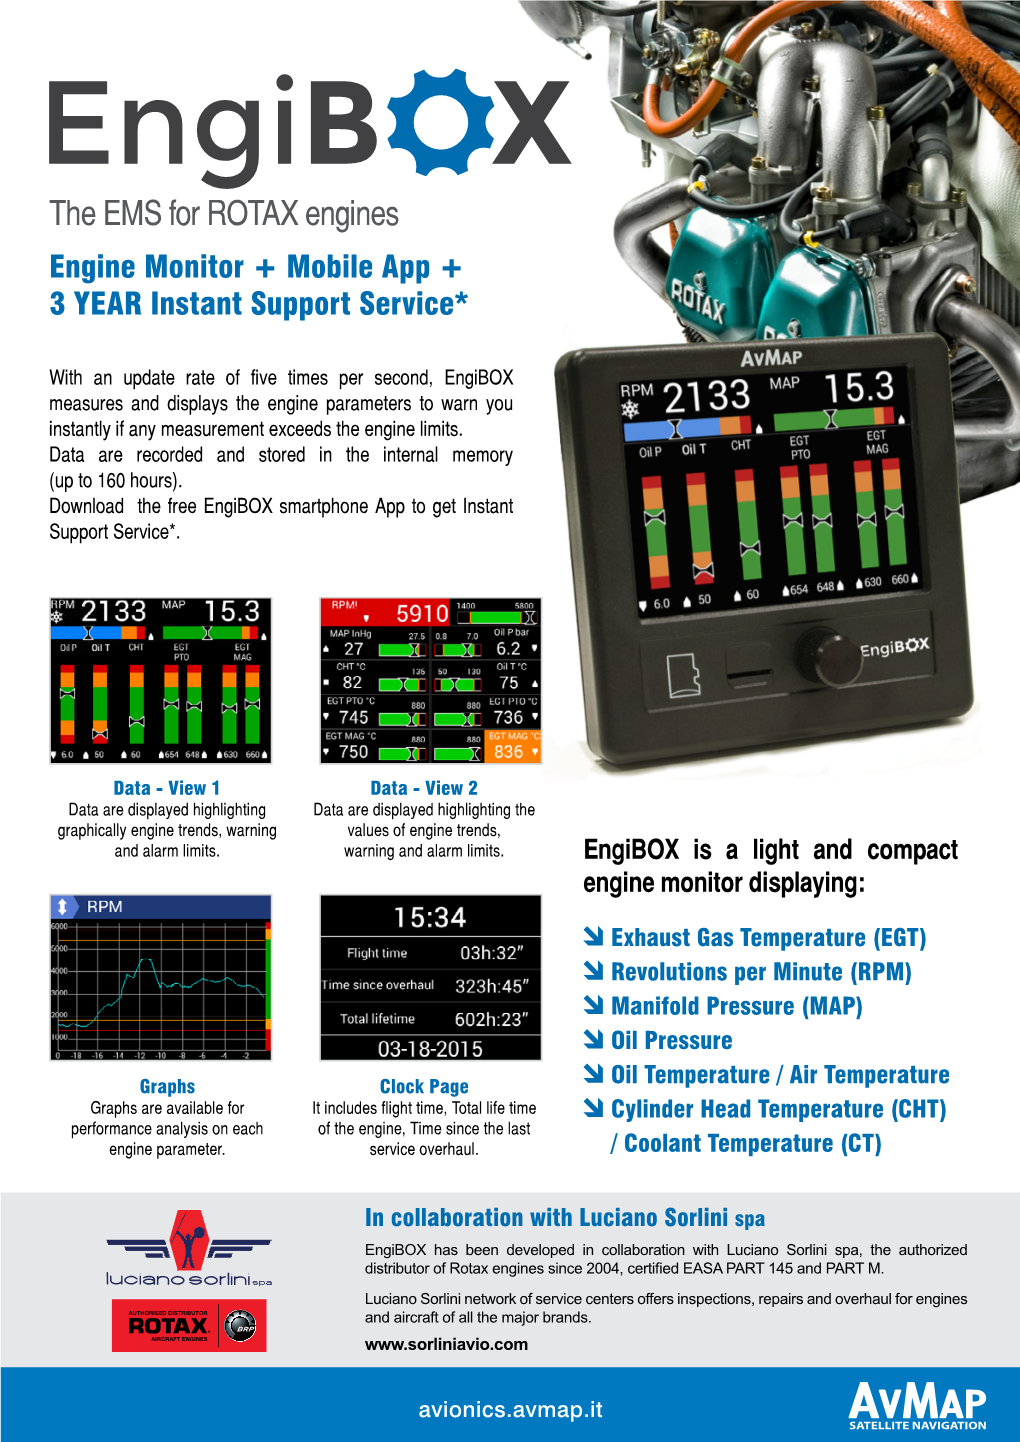 The EMS for ROTAX Engines Engine Monitor + Mobile App + 3 YEAR Instant Support Service*